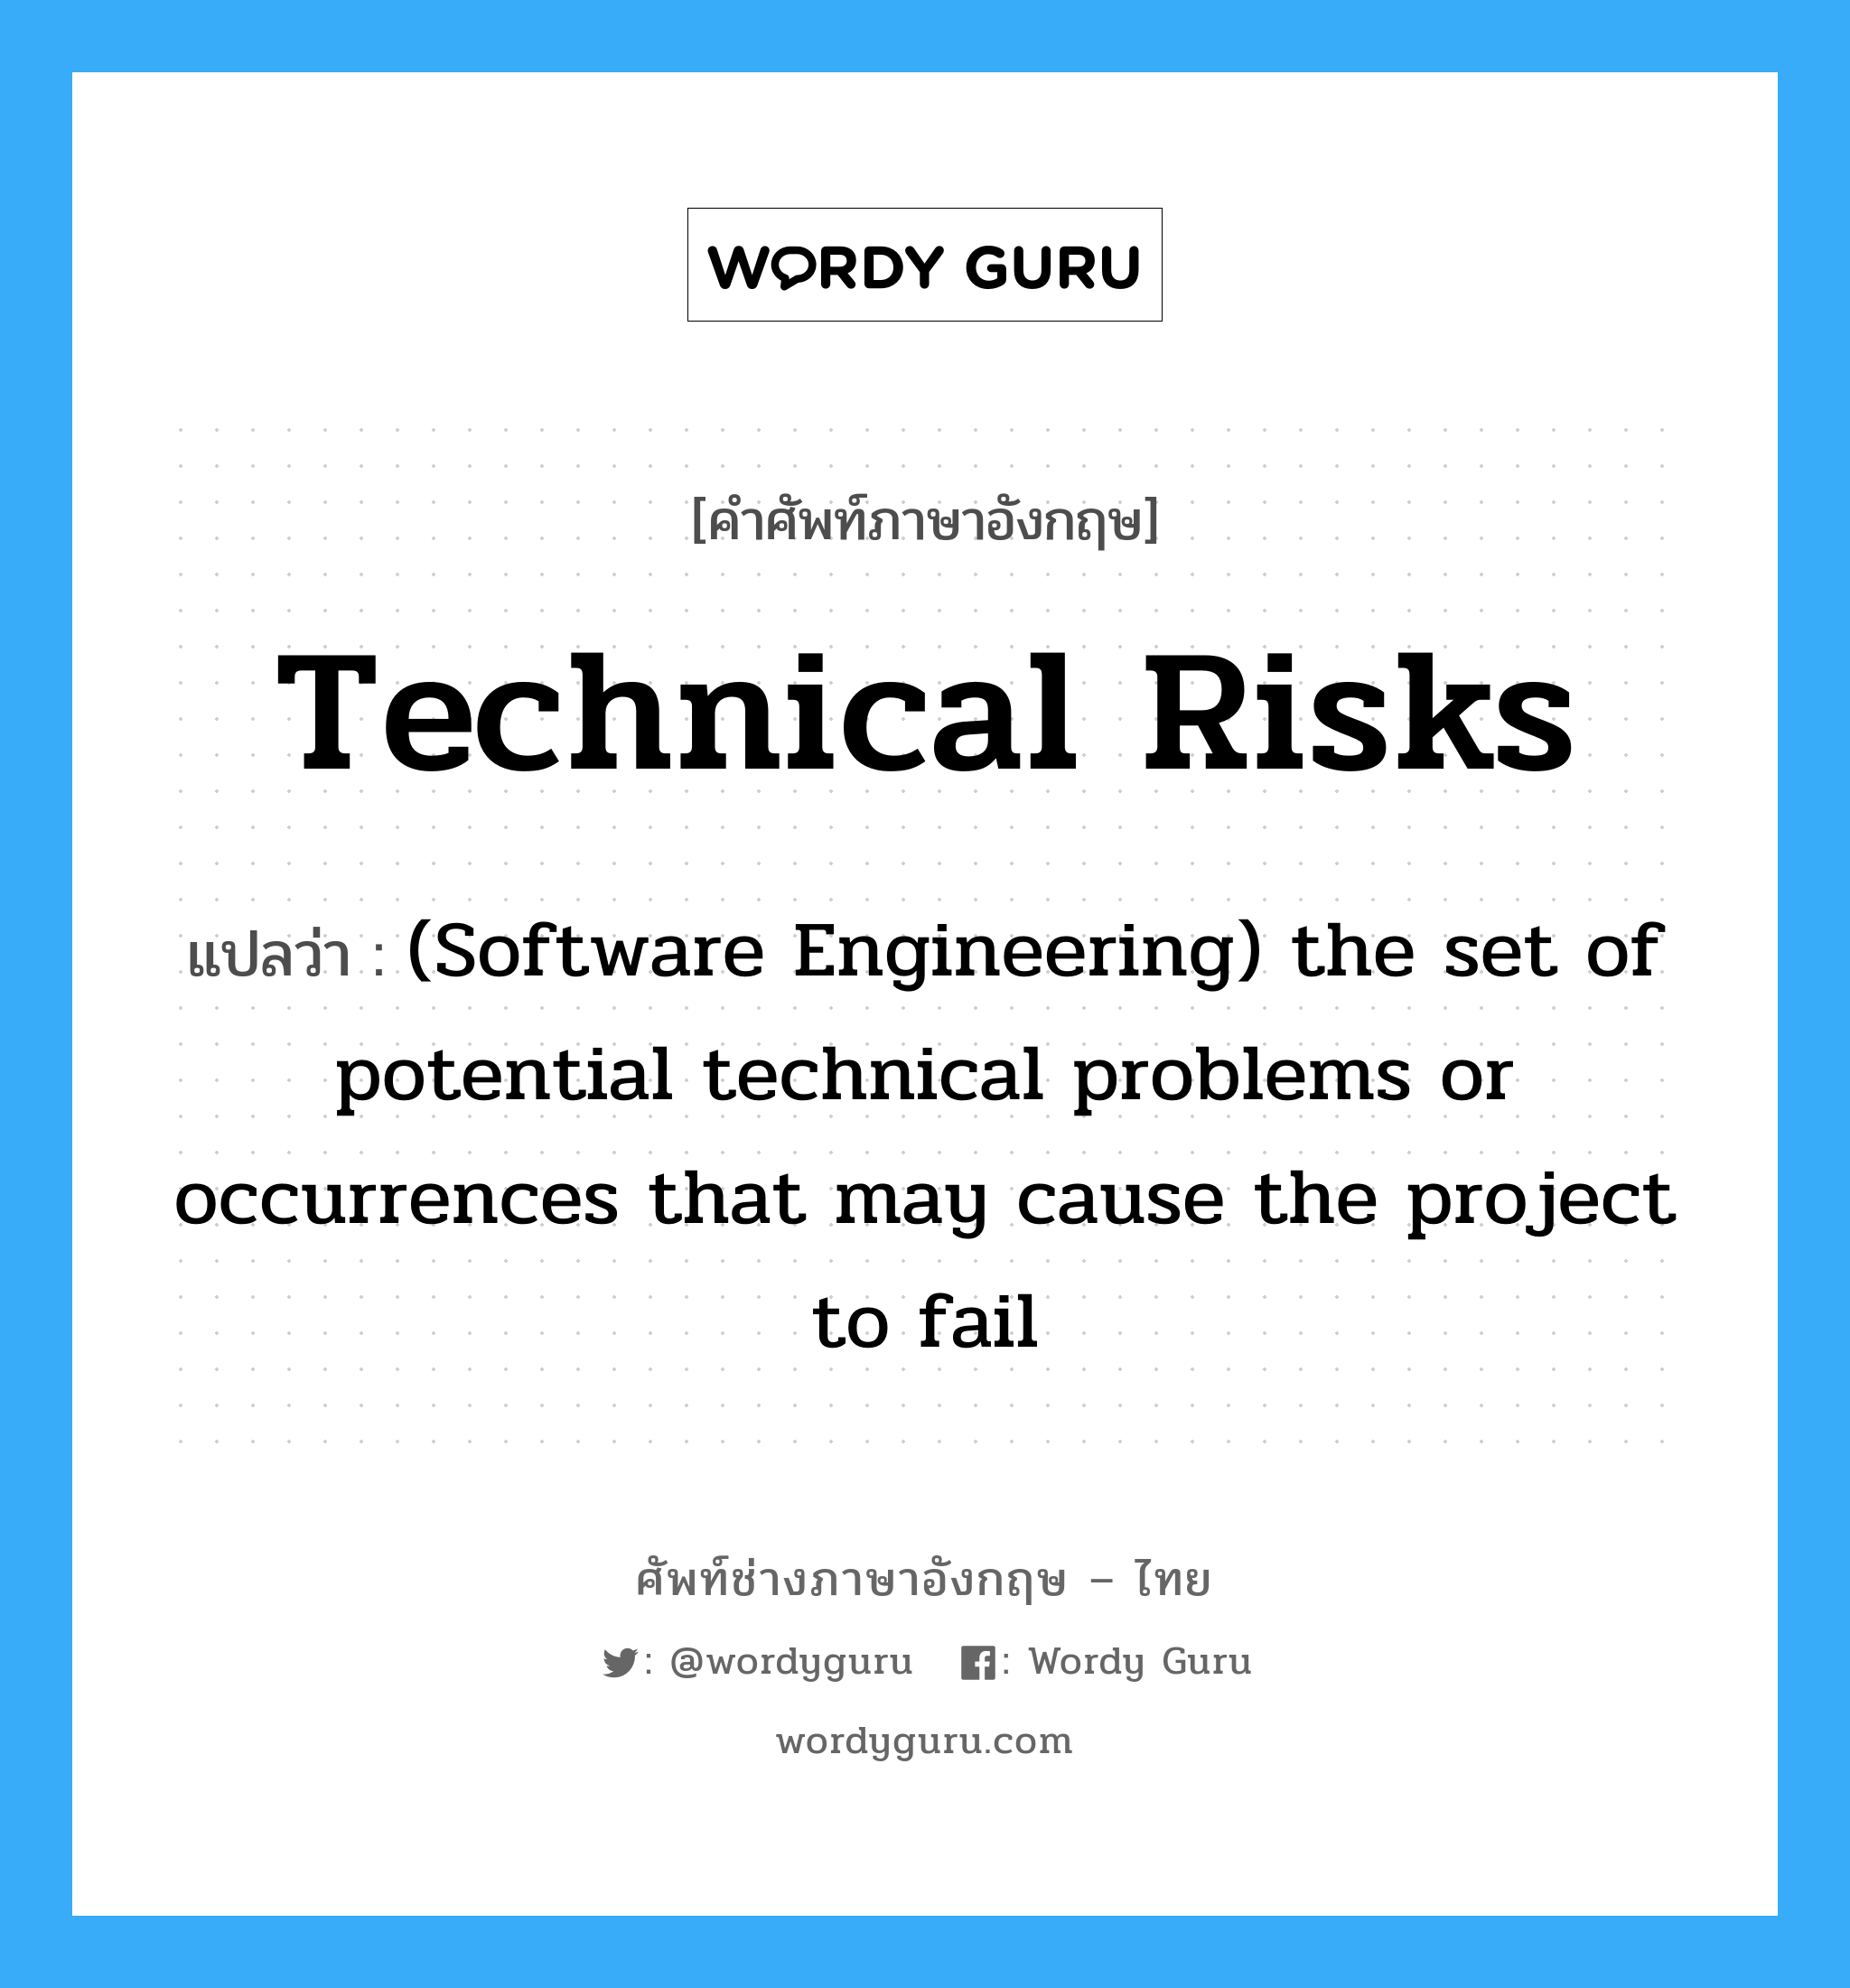 (Software Engineering) the set of potential technical problems or occurrences that may cause the project to fail ภาษาอังกฤษ?, คำศัพท์ช่างภาษาอังกฤษ - ไทย (Software Engineering) the set of potential technical problems or occurrences that may cause the project to fail คำศัพท์ภาษาอังกฤษ (Software Engineering) the set of potential technical problems or occurrences that may cause the project to fail แปลว่า Technical risks